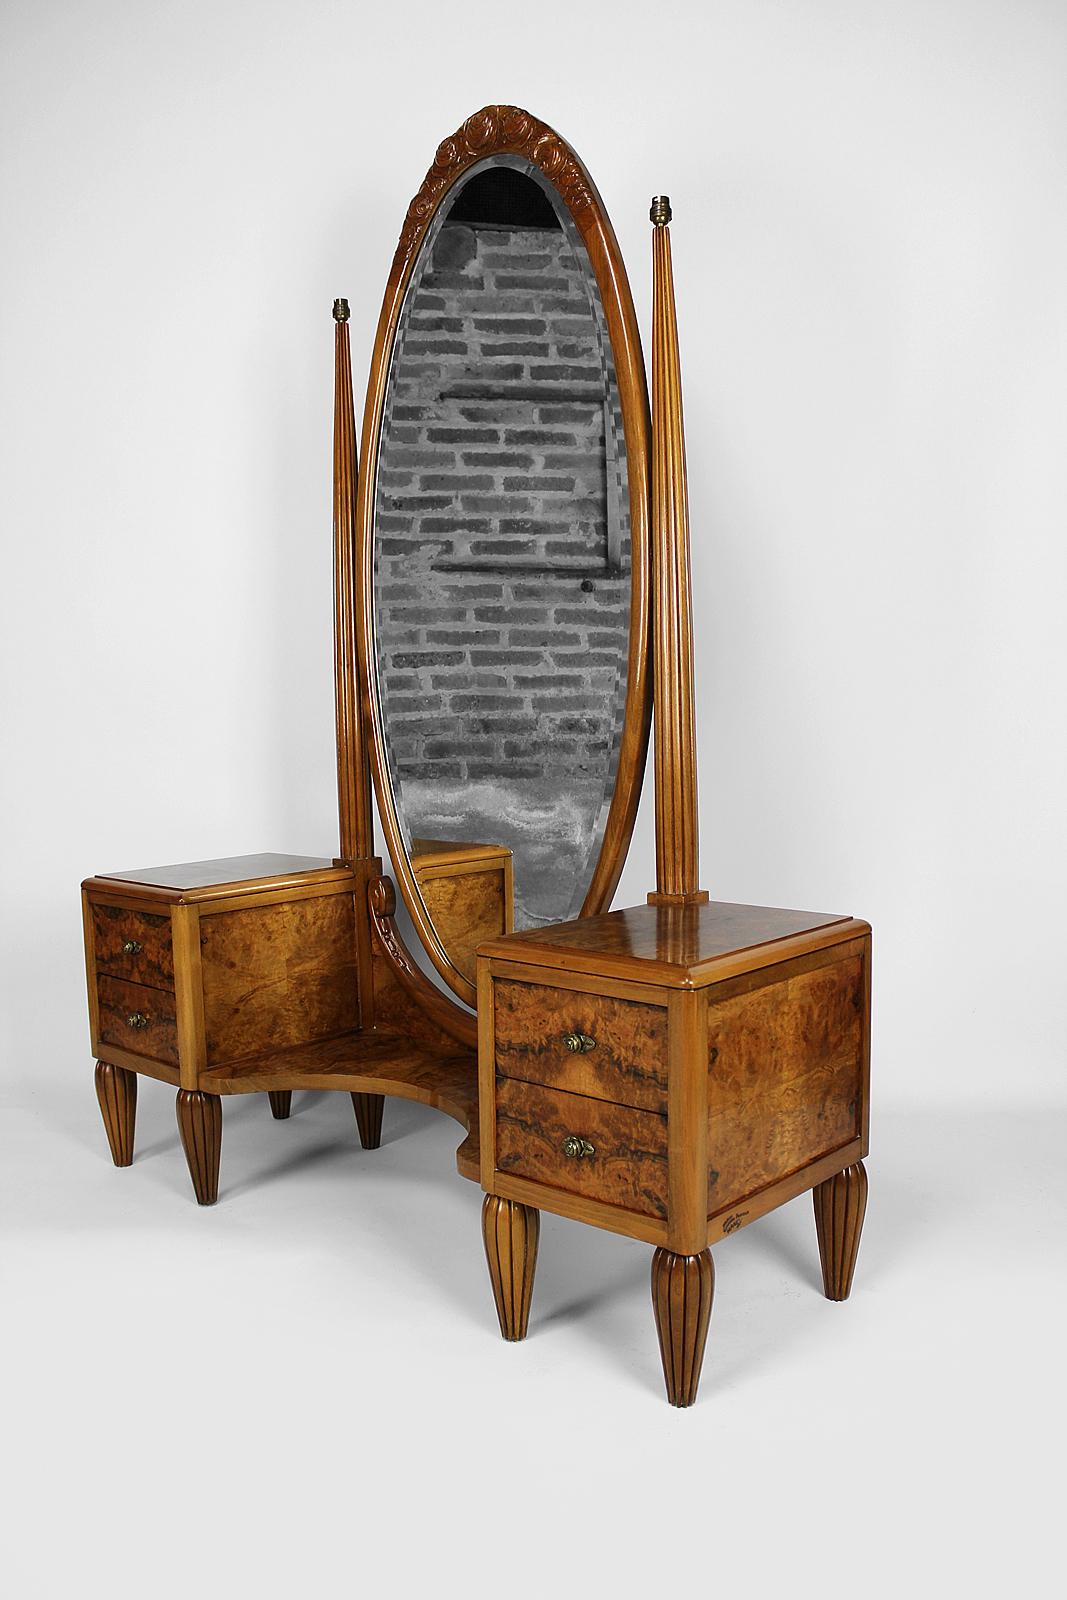 Beveled Art Deco Psyche Dressing Table and Pouf by Ateliers Gauthier-Poinsignon, c. 1920 For Sale